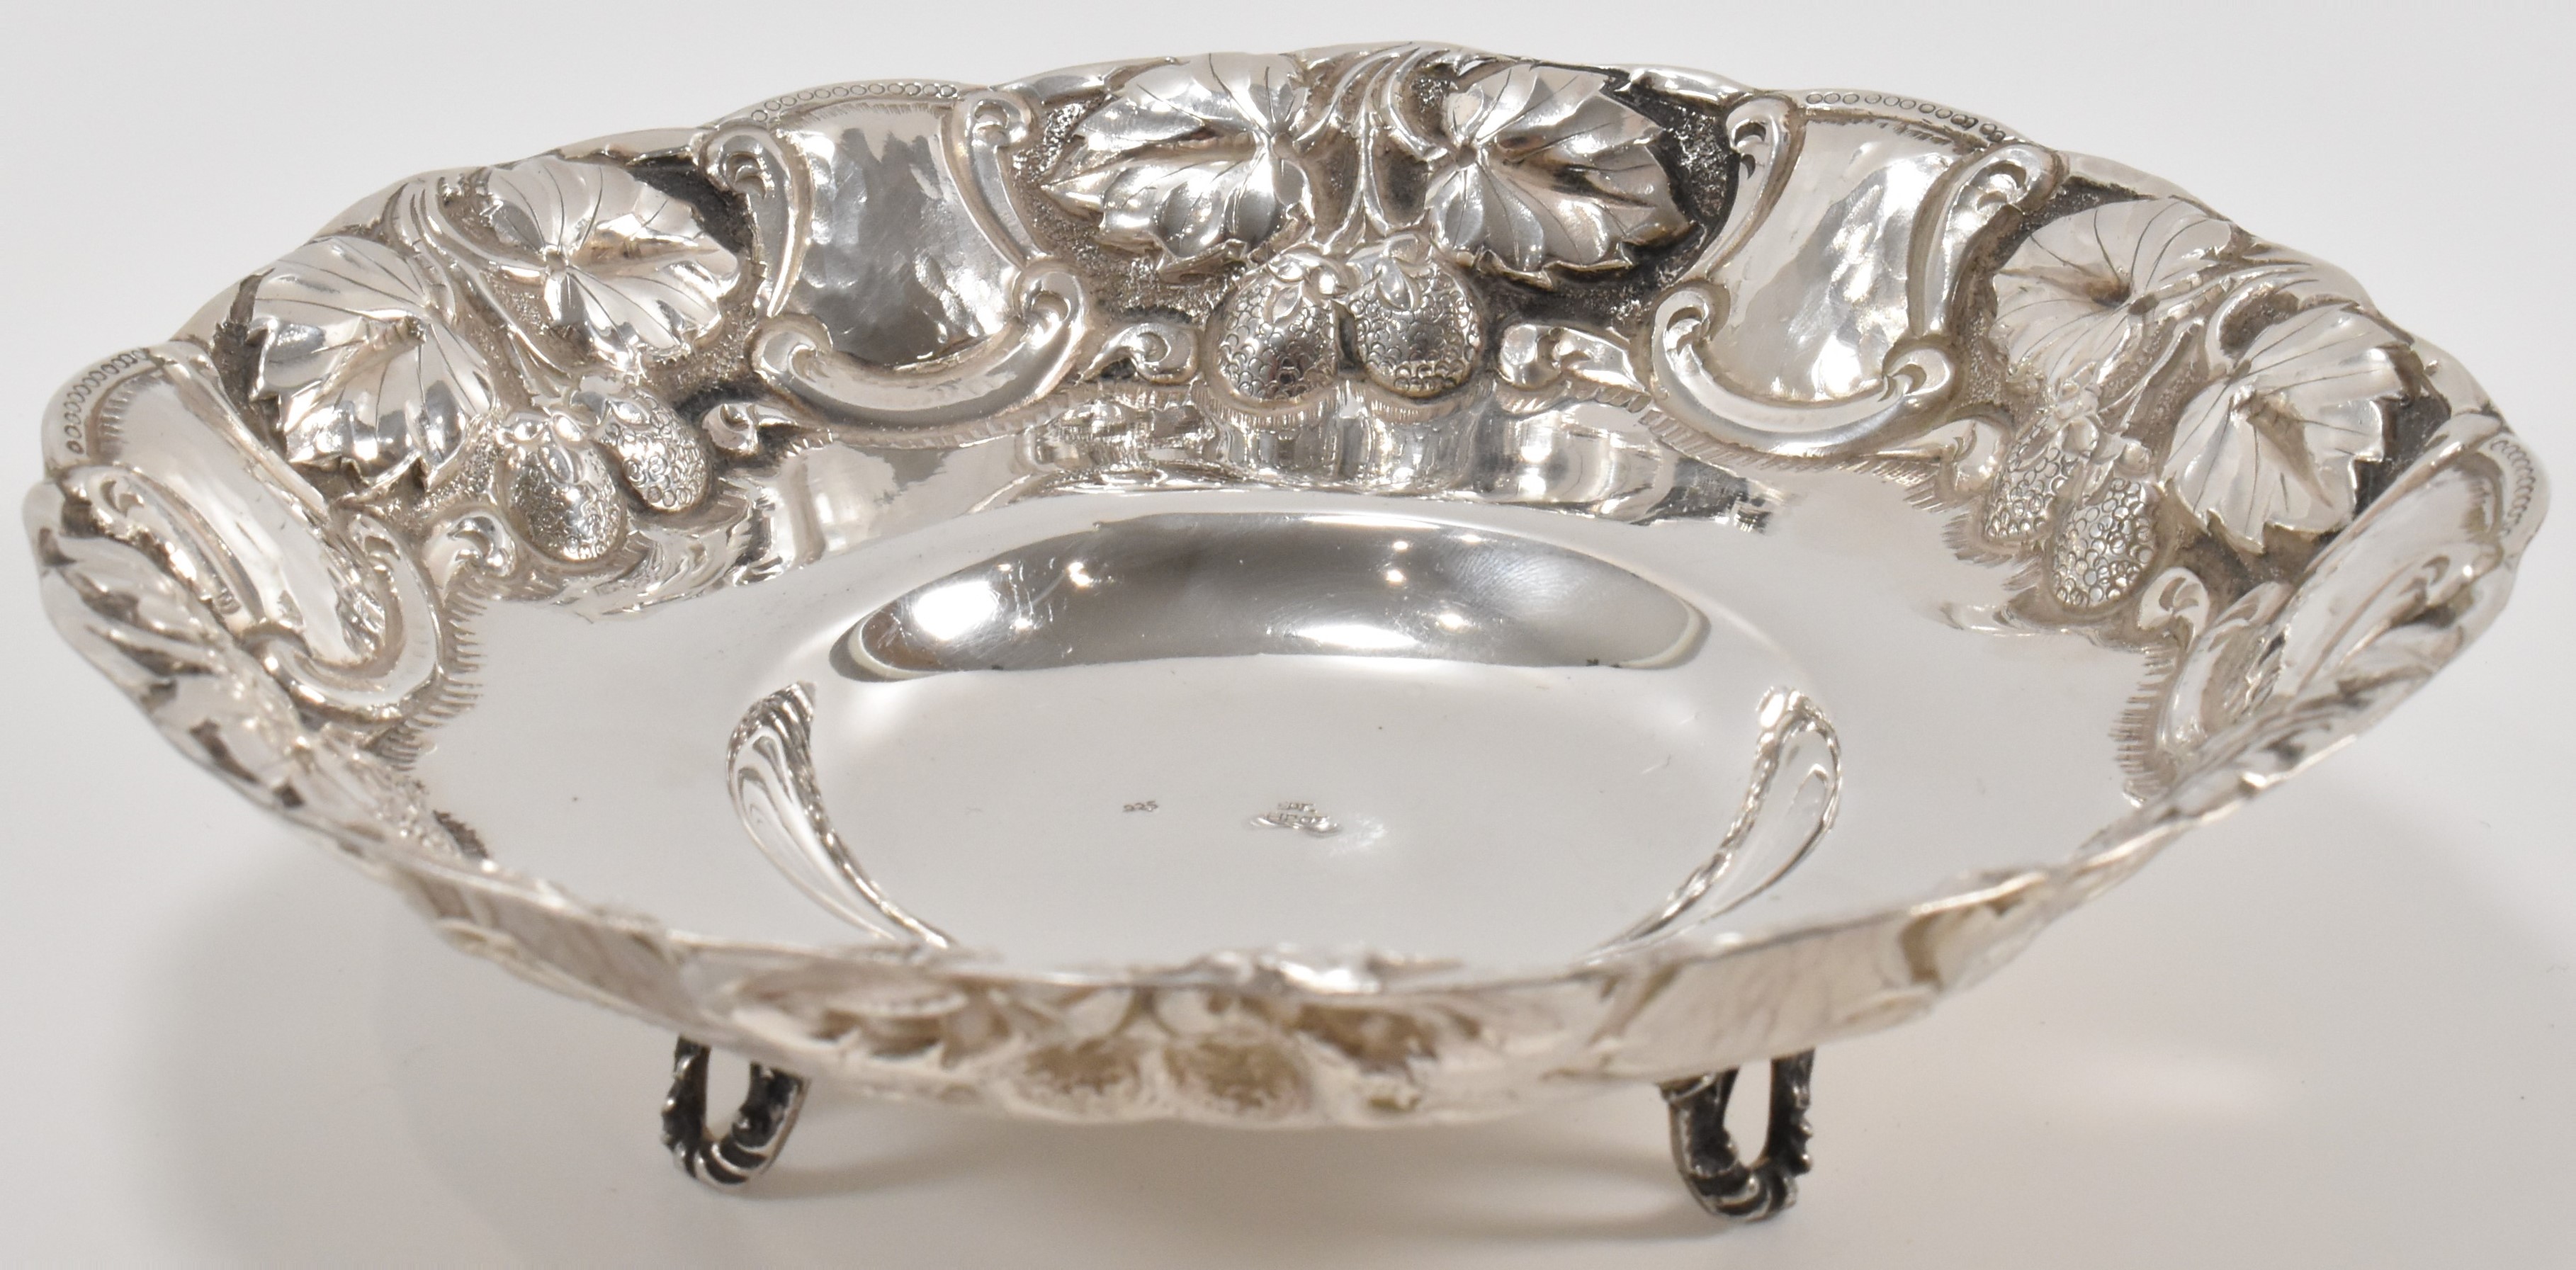 SILVER REPOUSSE STRAWBERRY DISH